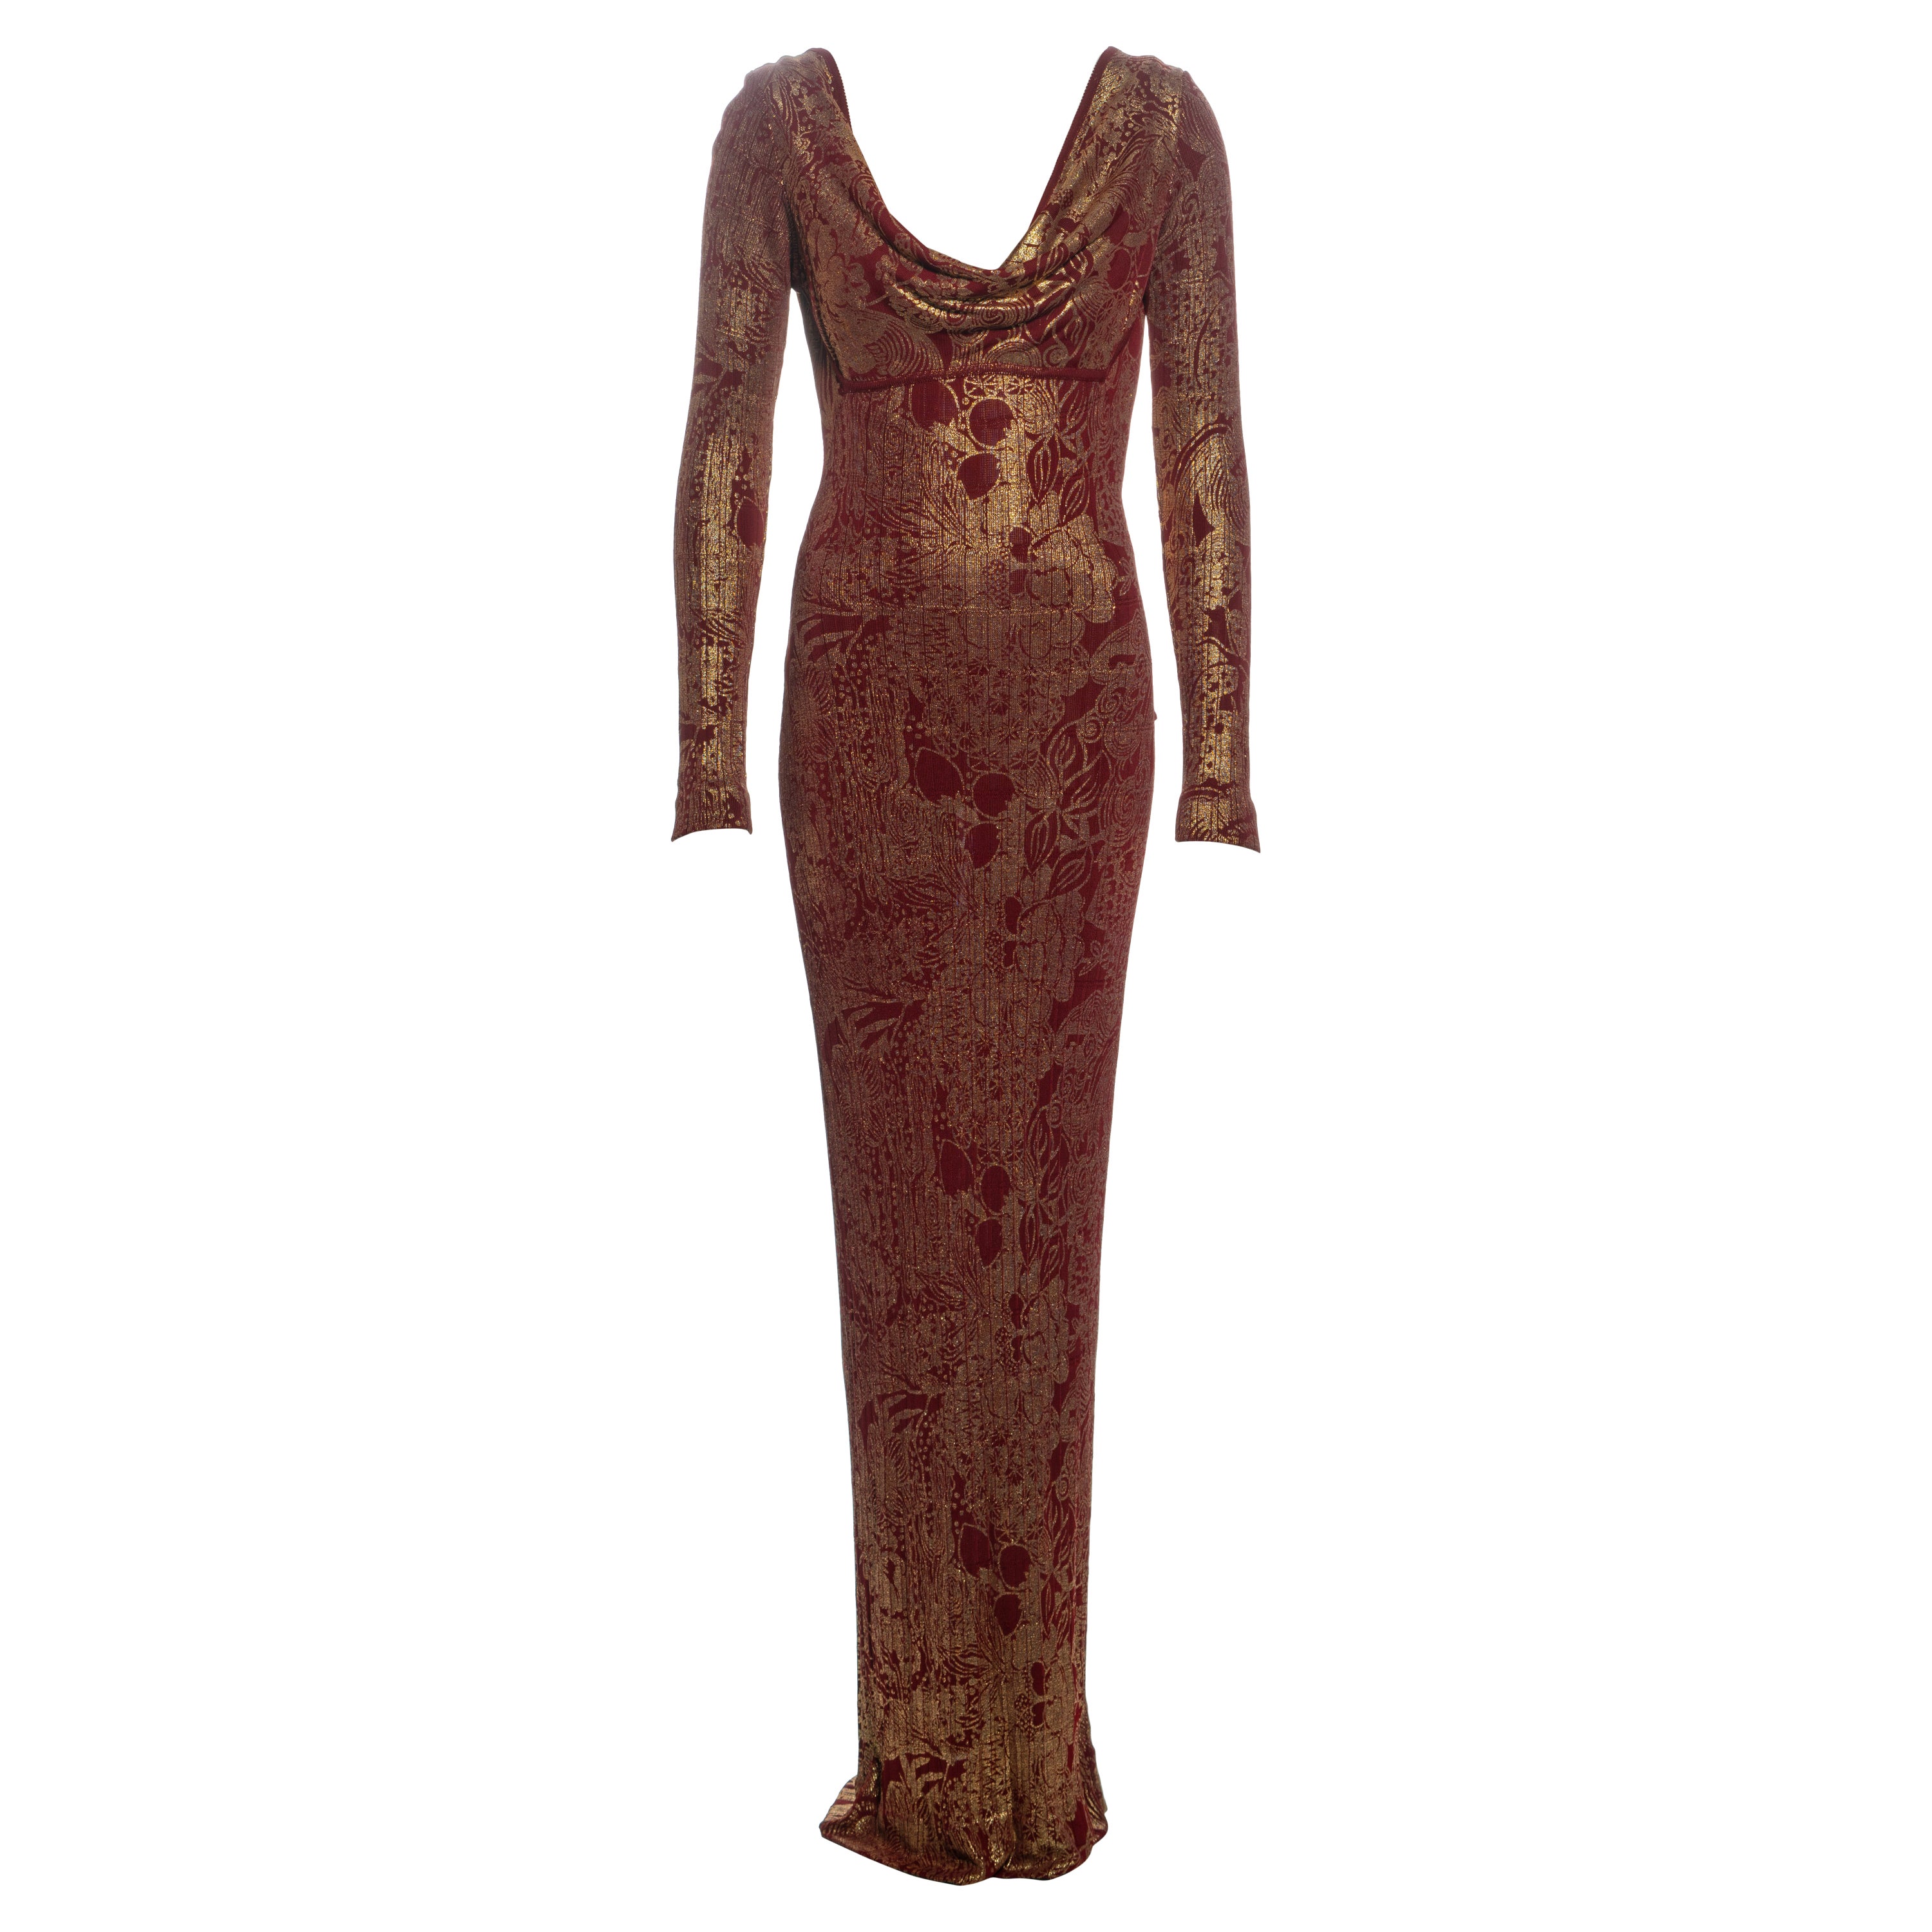 John Galliano Bordeaux Knit Evening Dress with Gold Foil Floral Print, fw 1998 For Sale